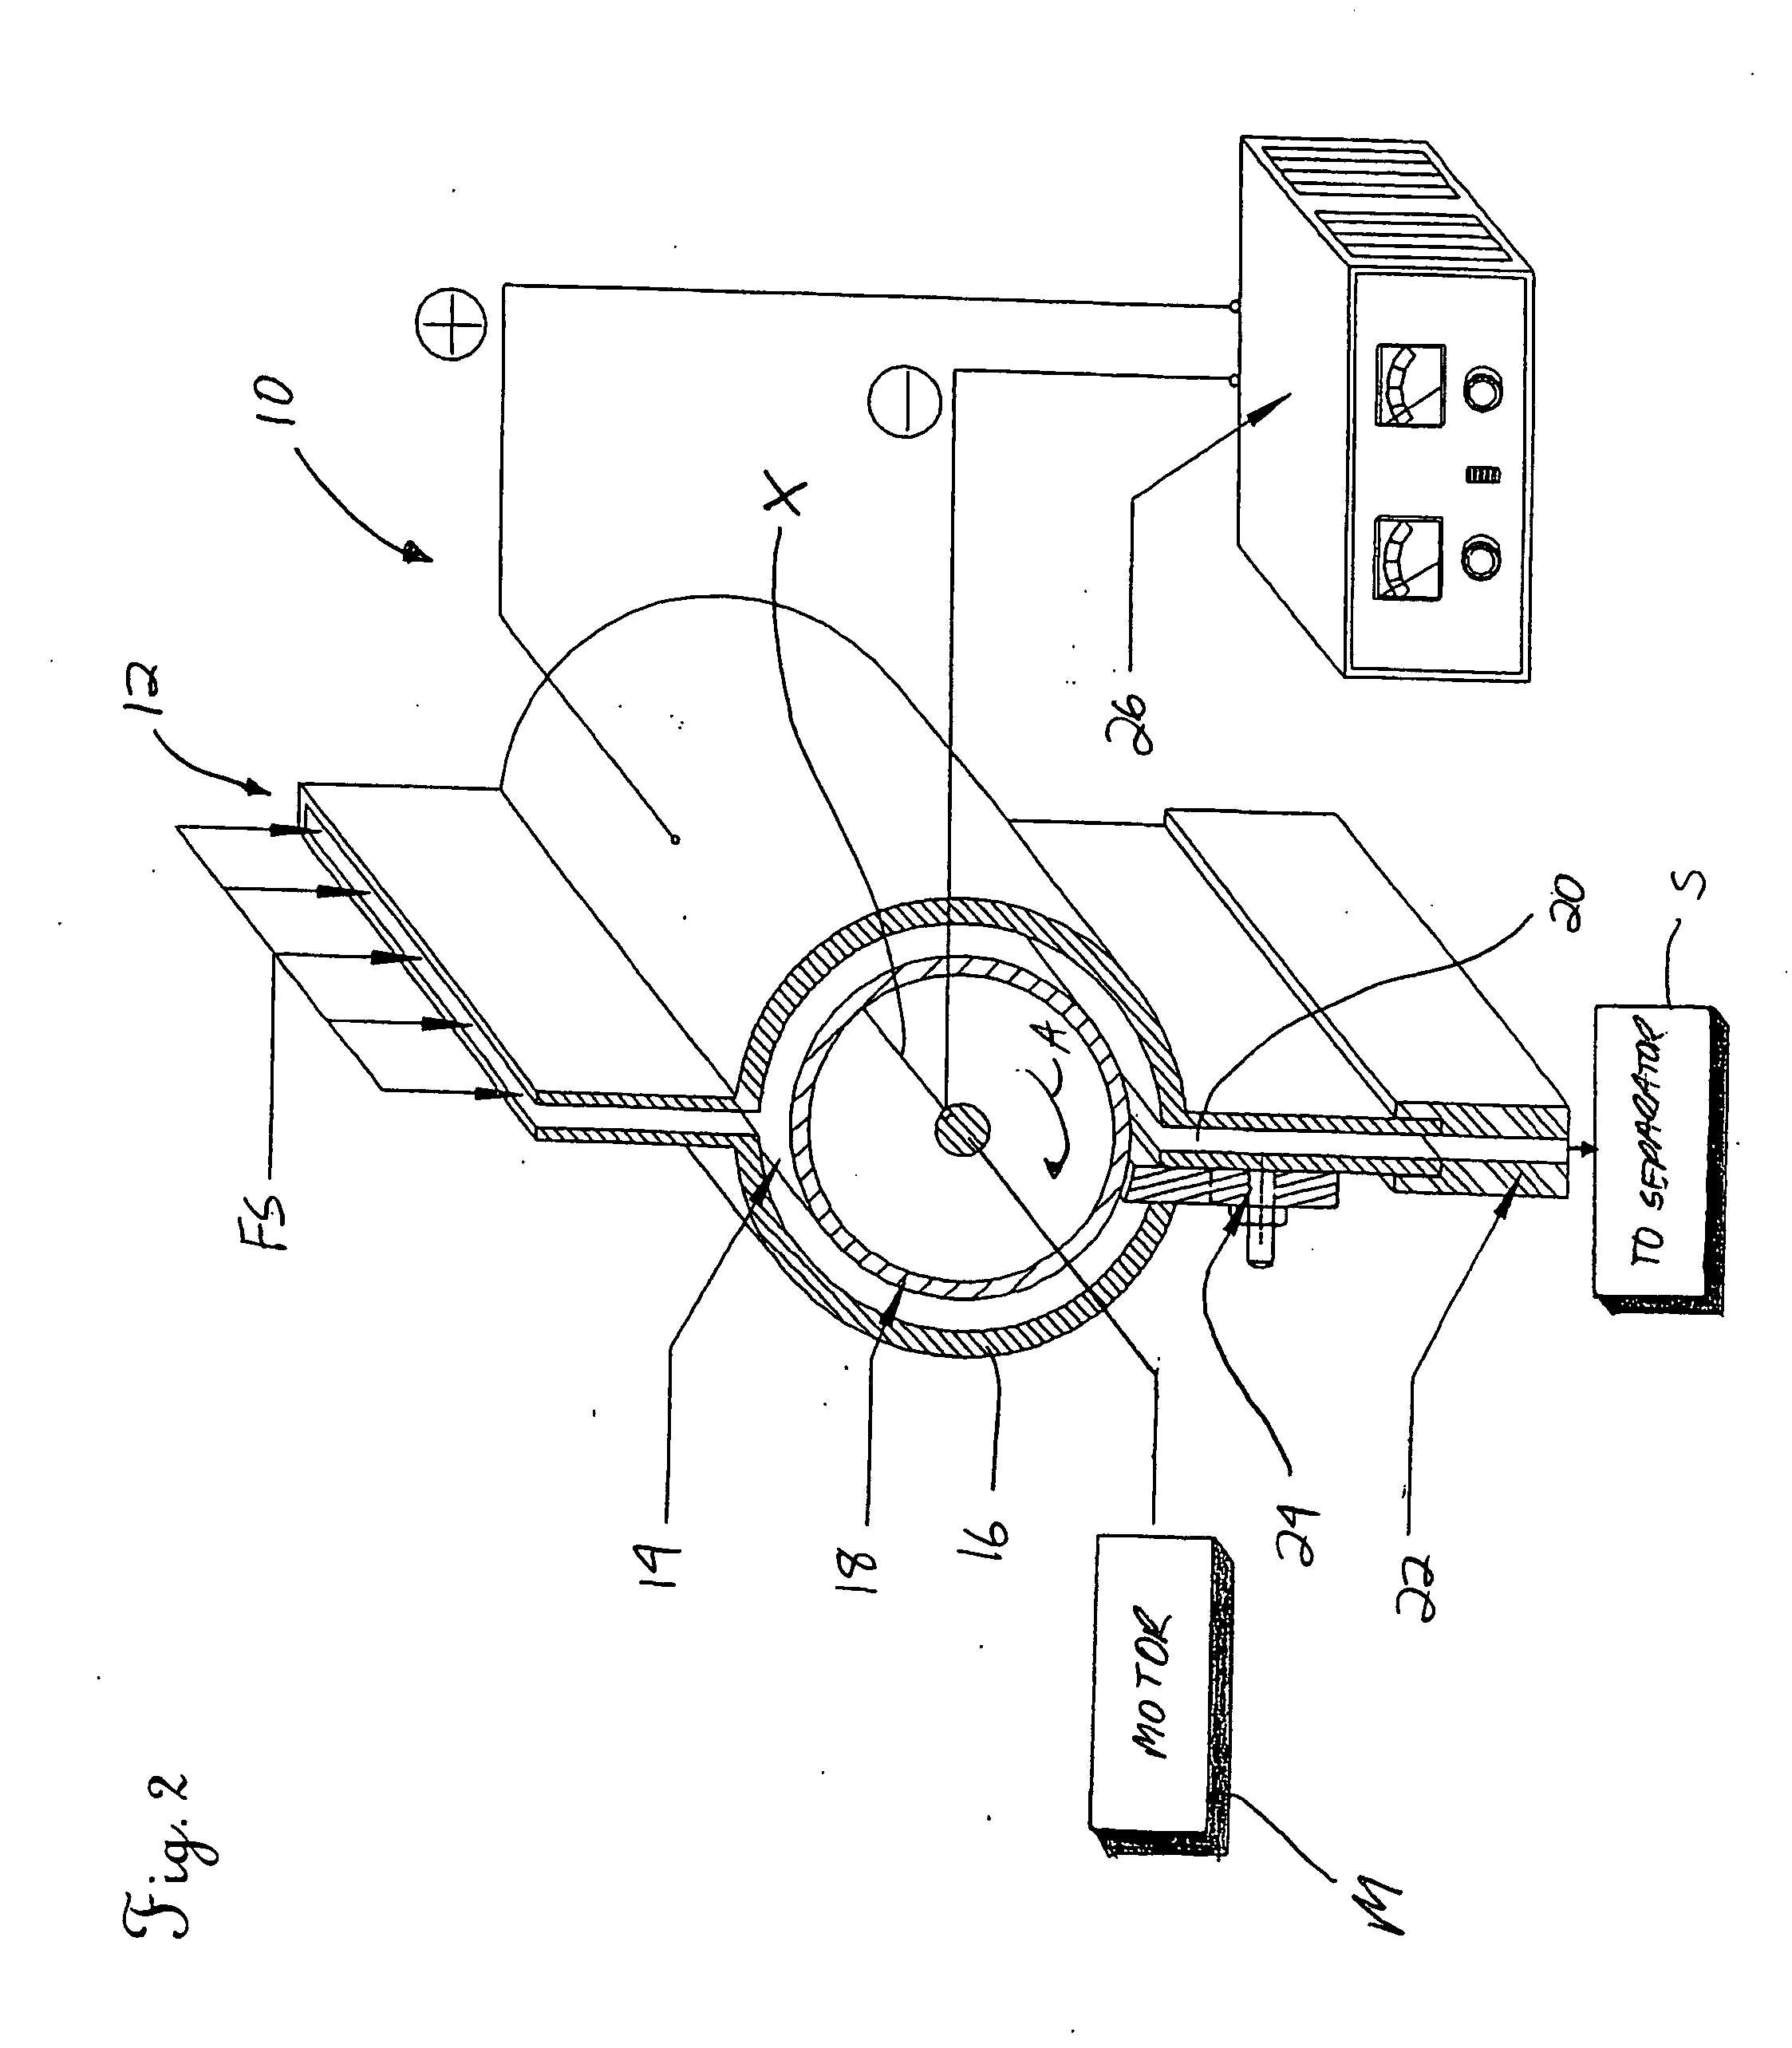 Electrostatic particle charger, electrostatic separation system, and related methods